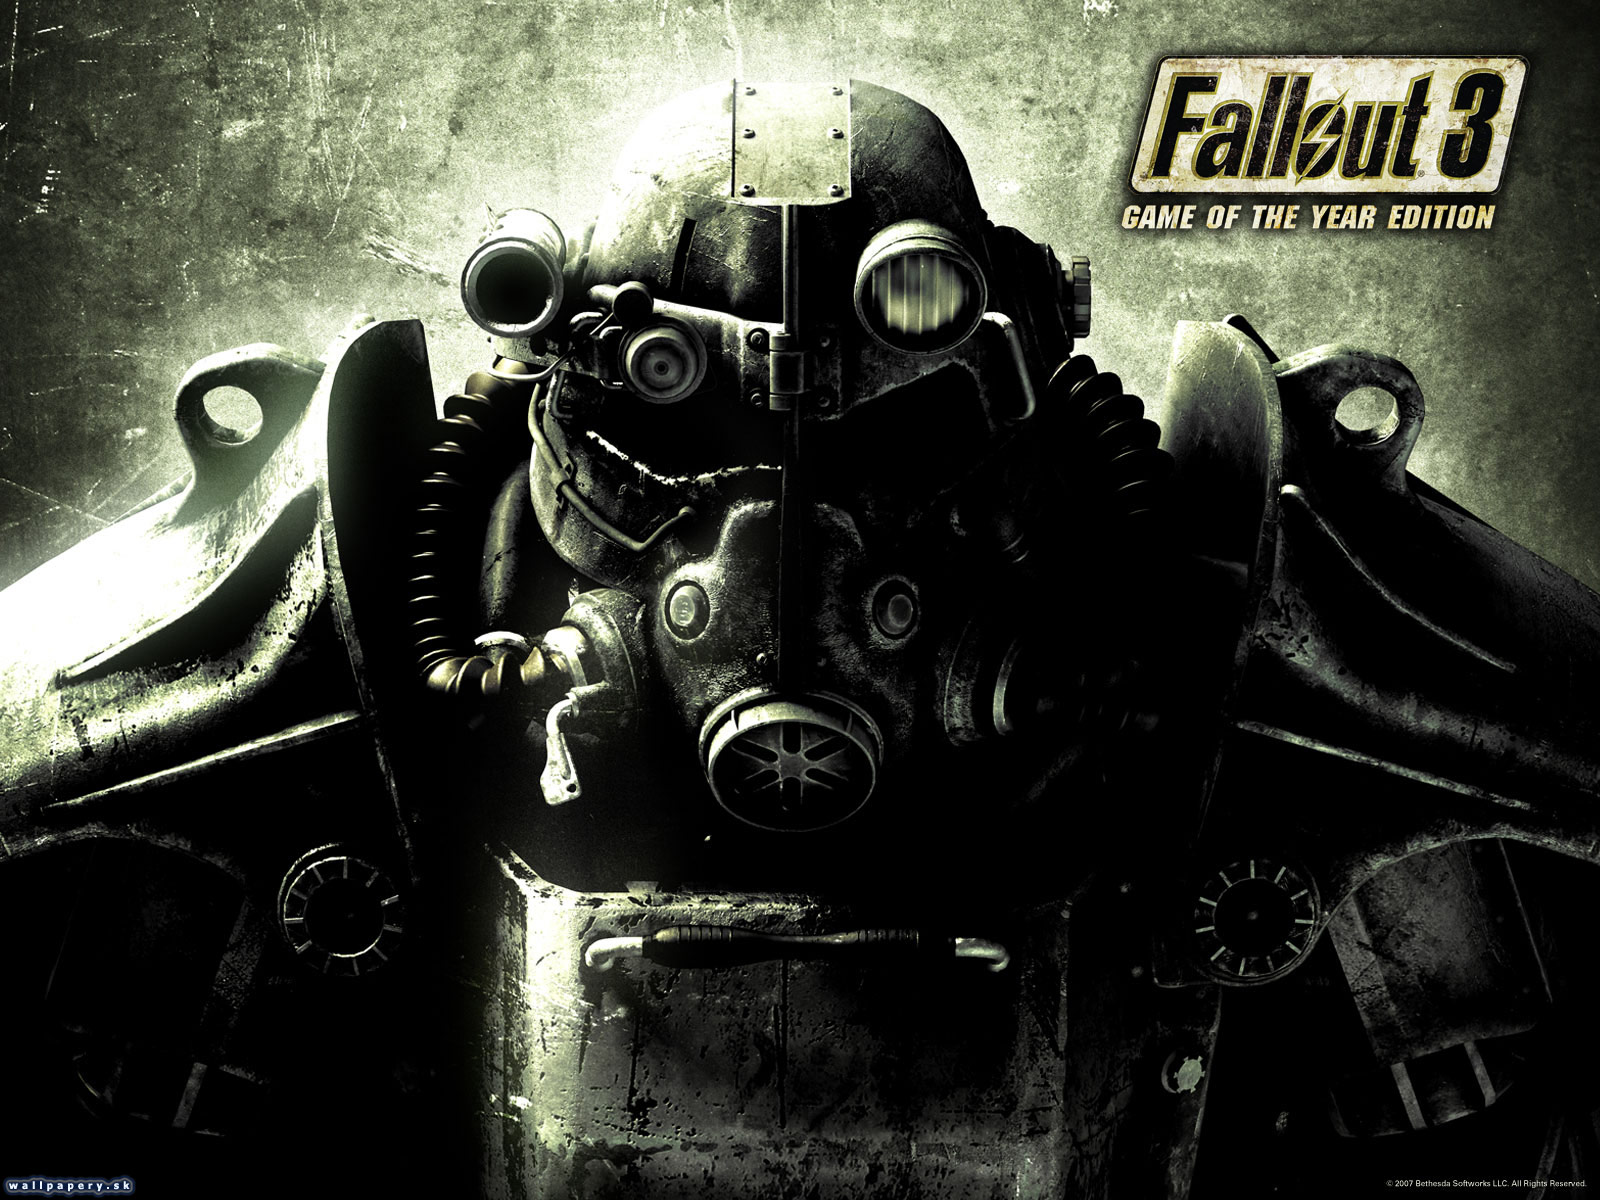 Fallout 3: Game of the Year Edition - wallpaper 1